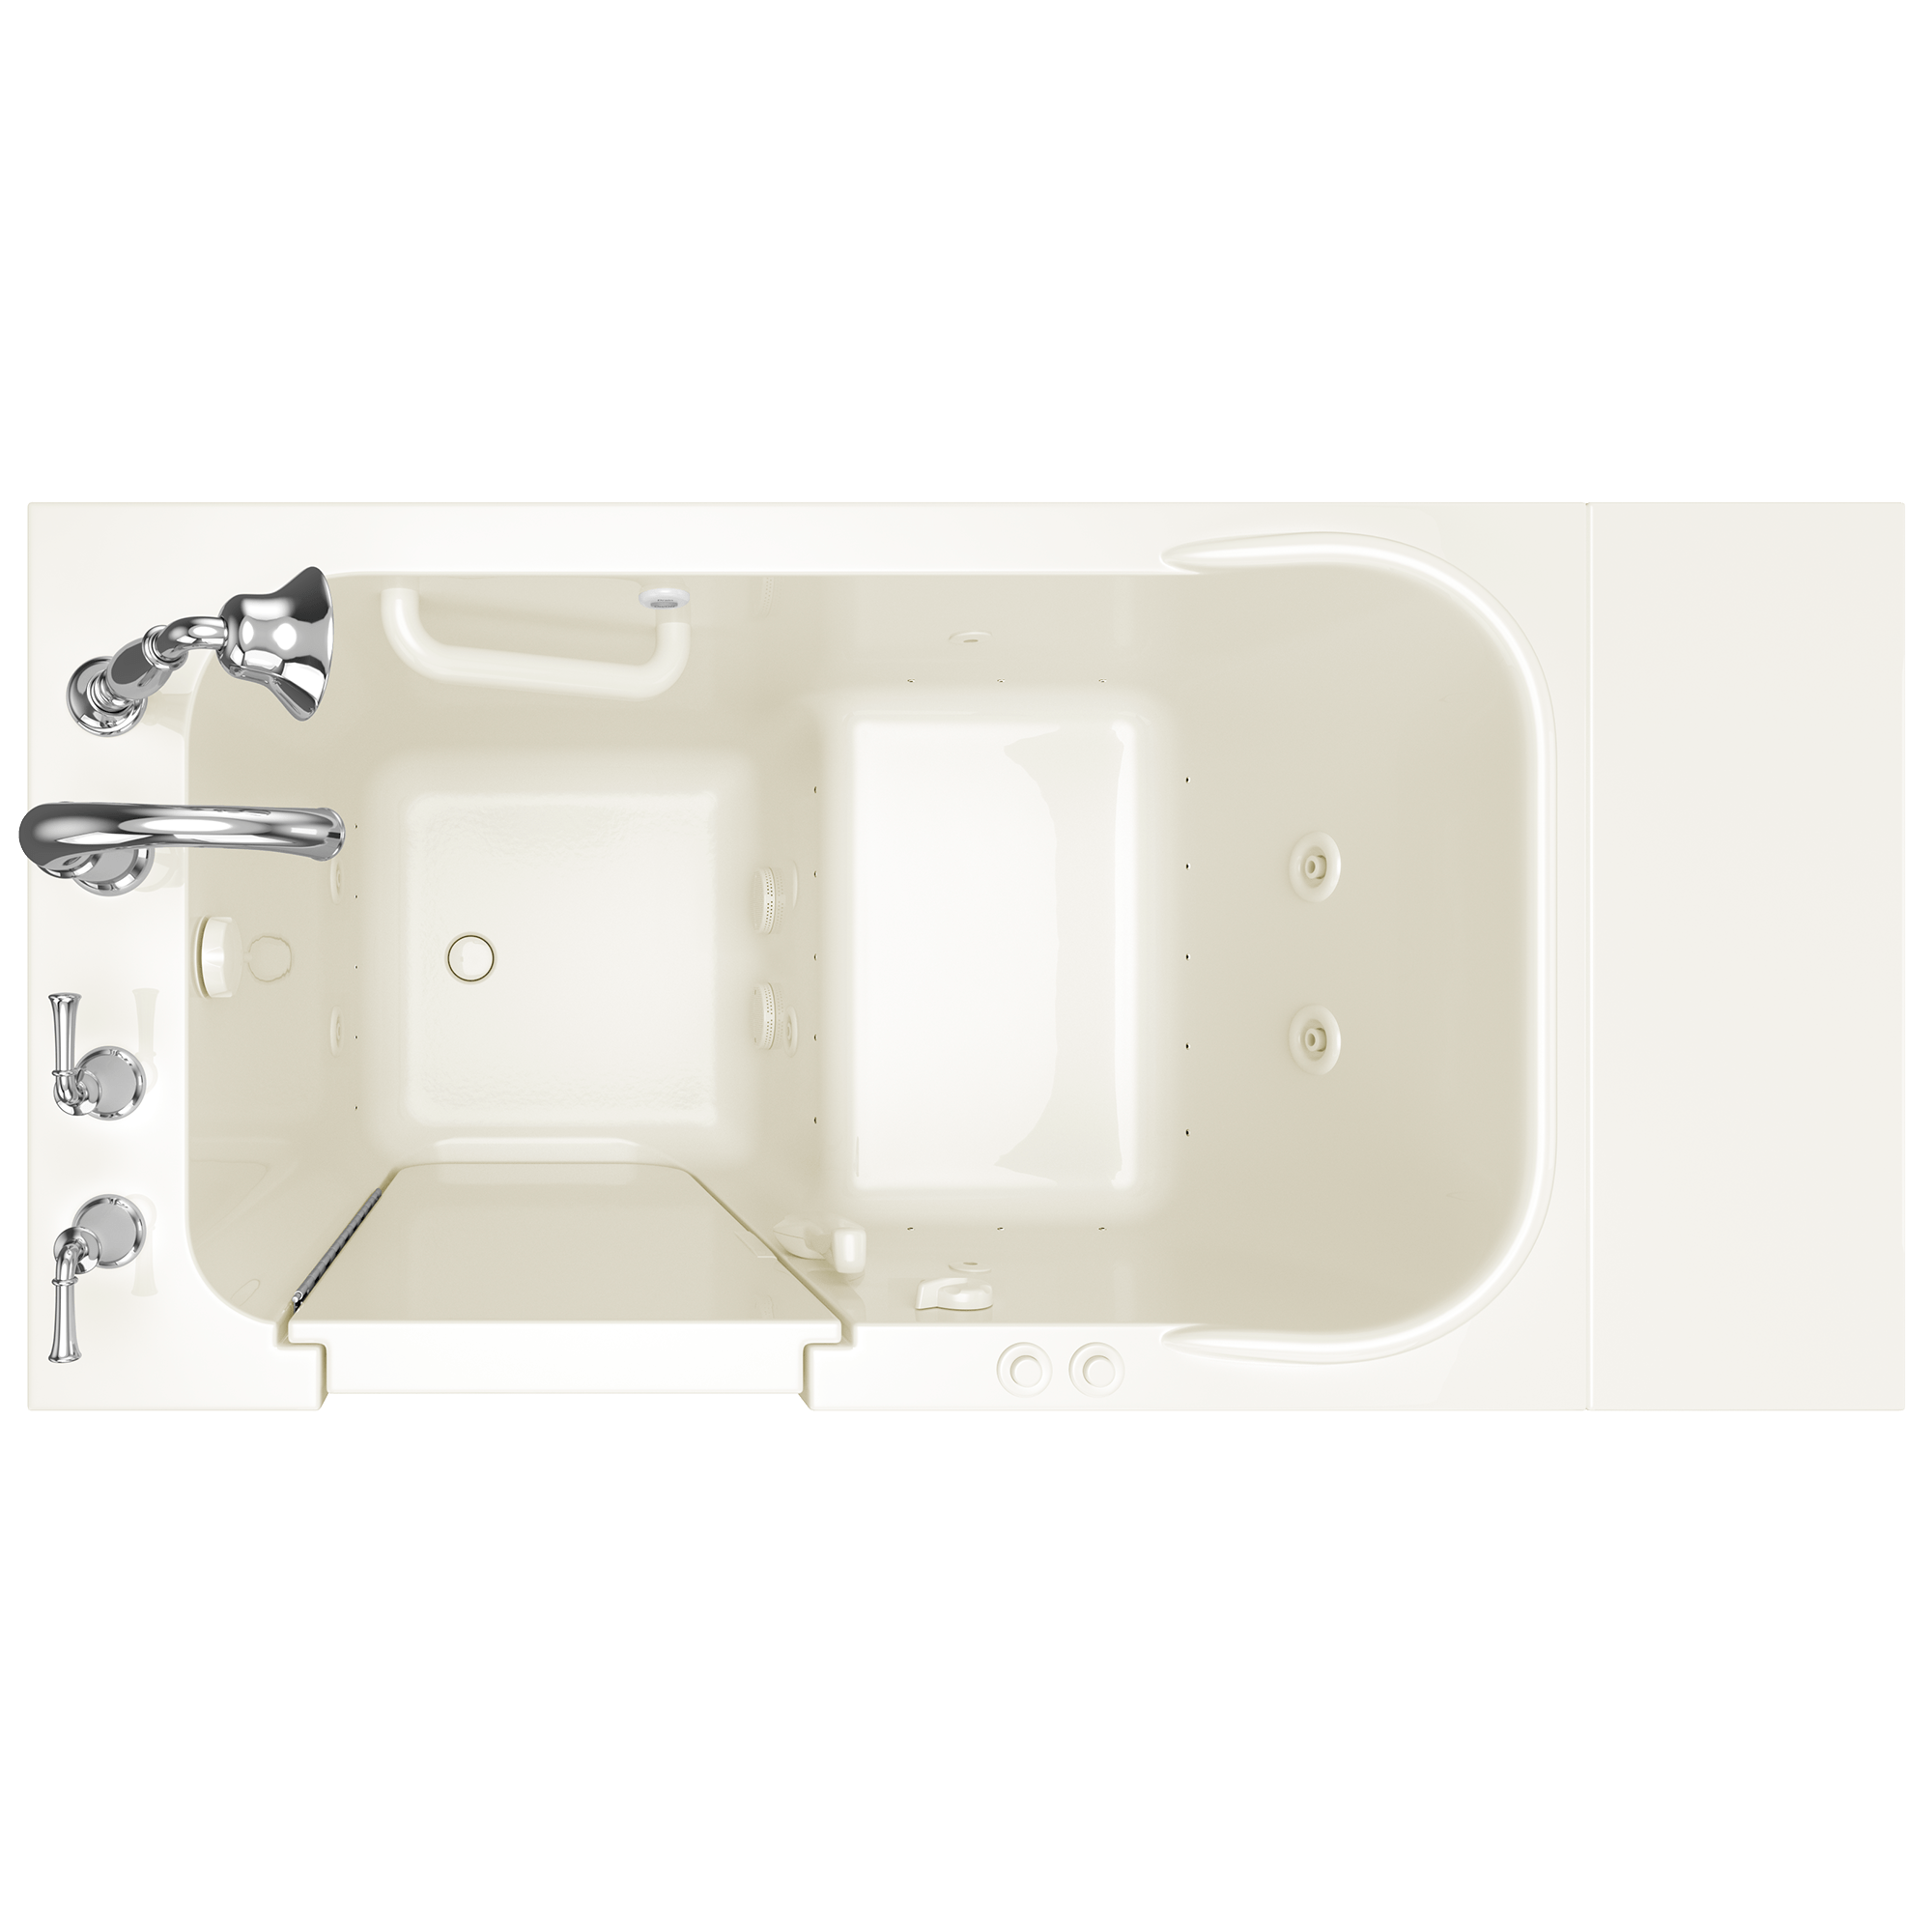 Gelcoat Value Series 28 x 48 Inch Walk in Tub With Combination Air Spa and Whirlpool Systems   Left Hand Drain With Faucet WIB LINEN